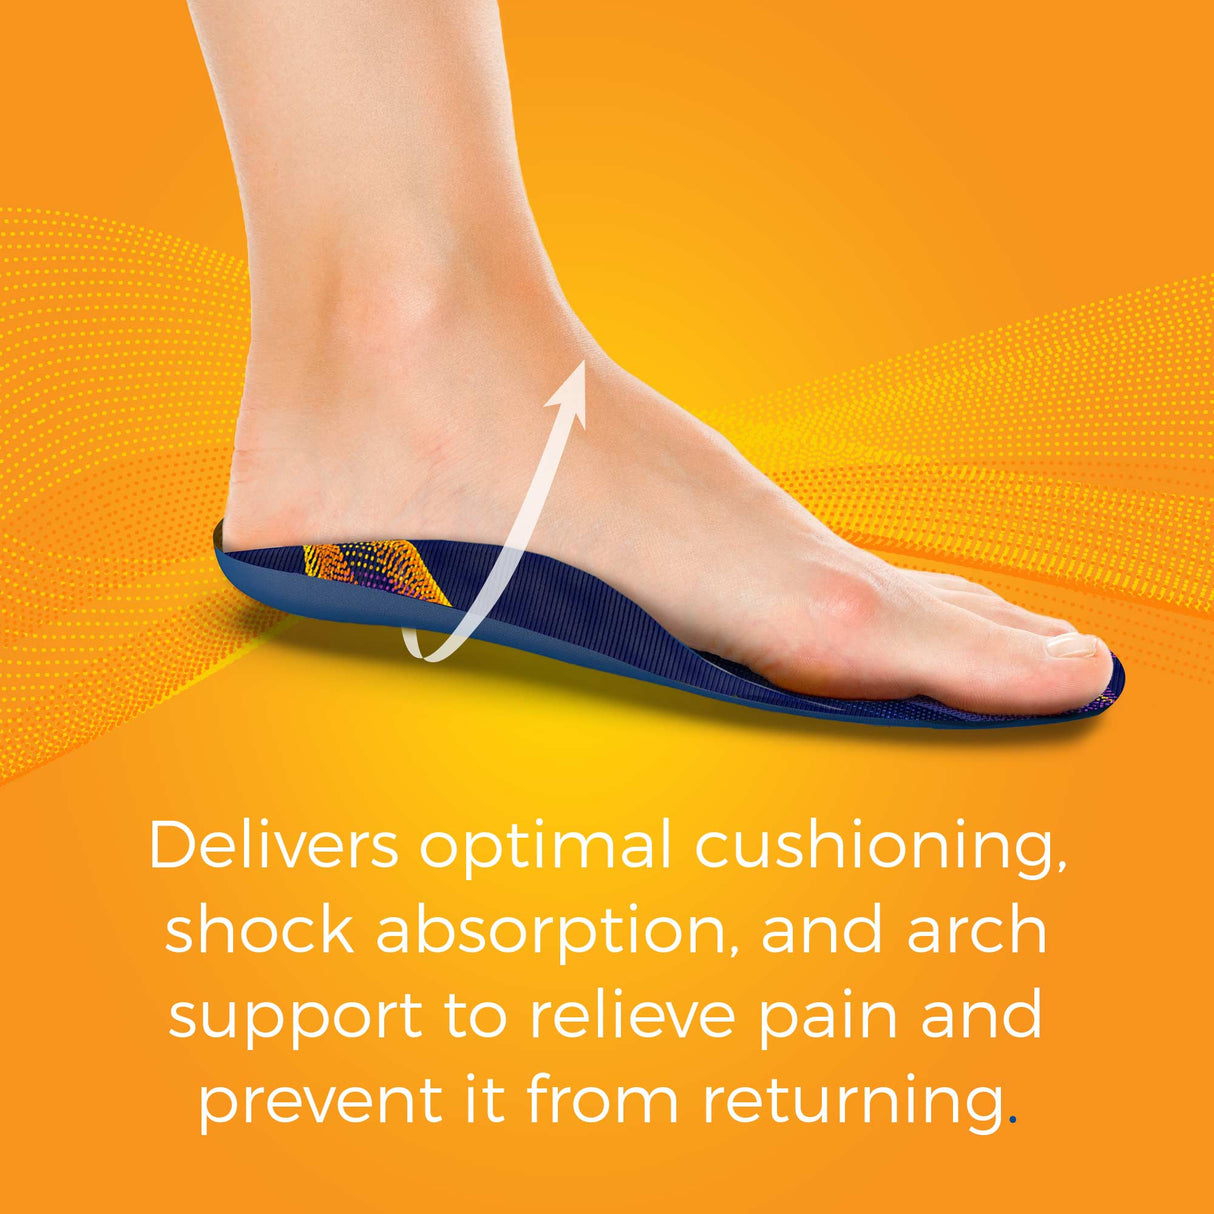 plantar fasciitis sized to fit insoles delivers optimal cushioning shock absorption and arch support to relieve pain and prevent it from returning